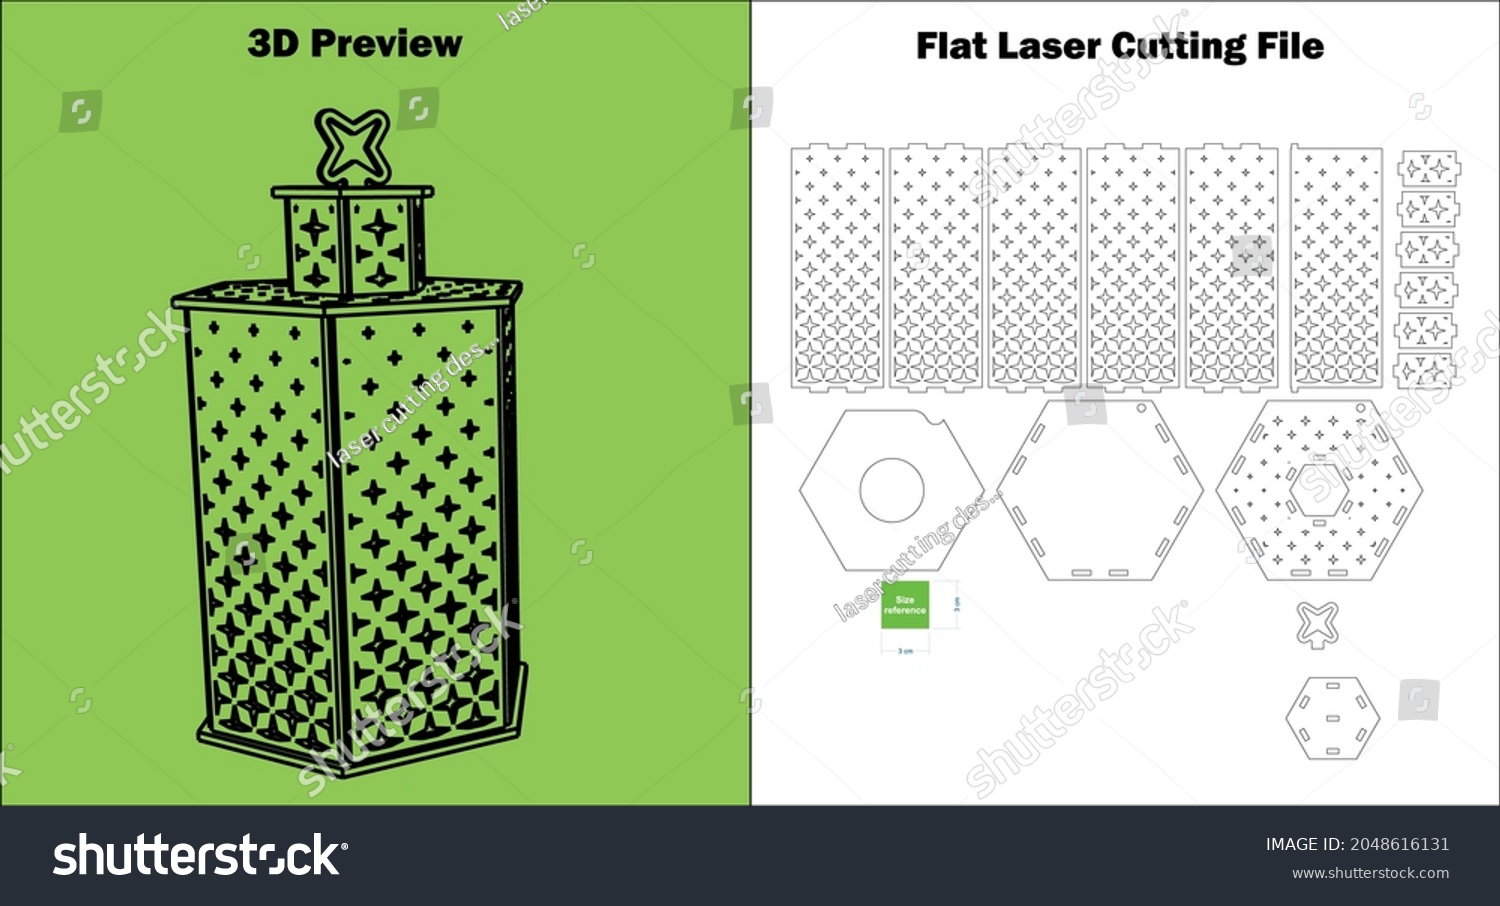 SVG of Lantern
Check out my laser-cutting lantern. it can be made with all 3mm material thicknesses. svg